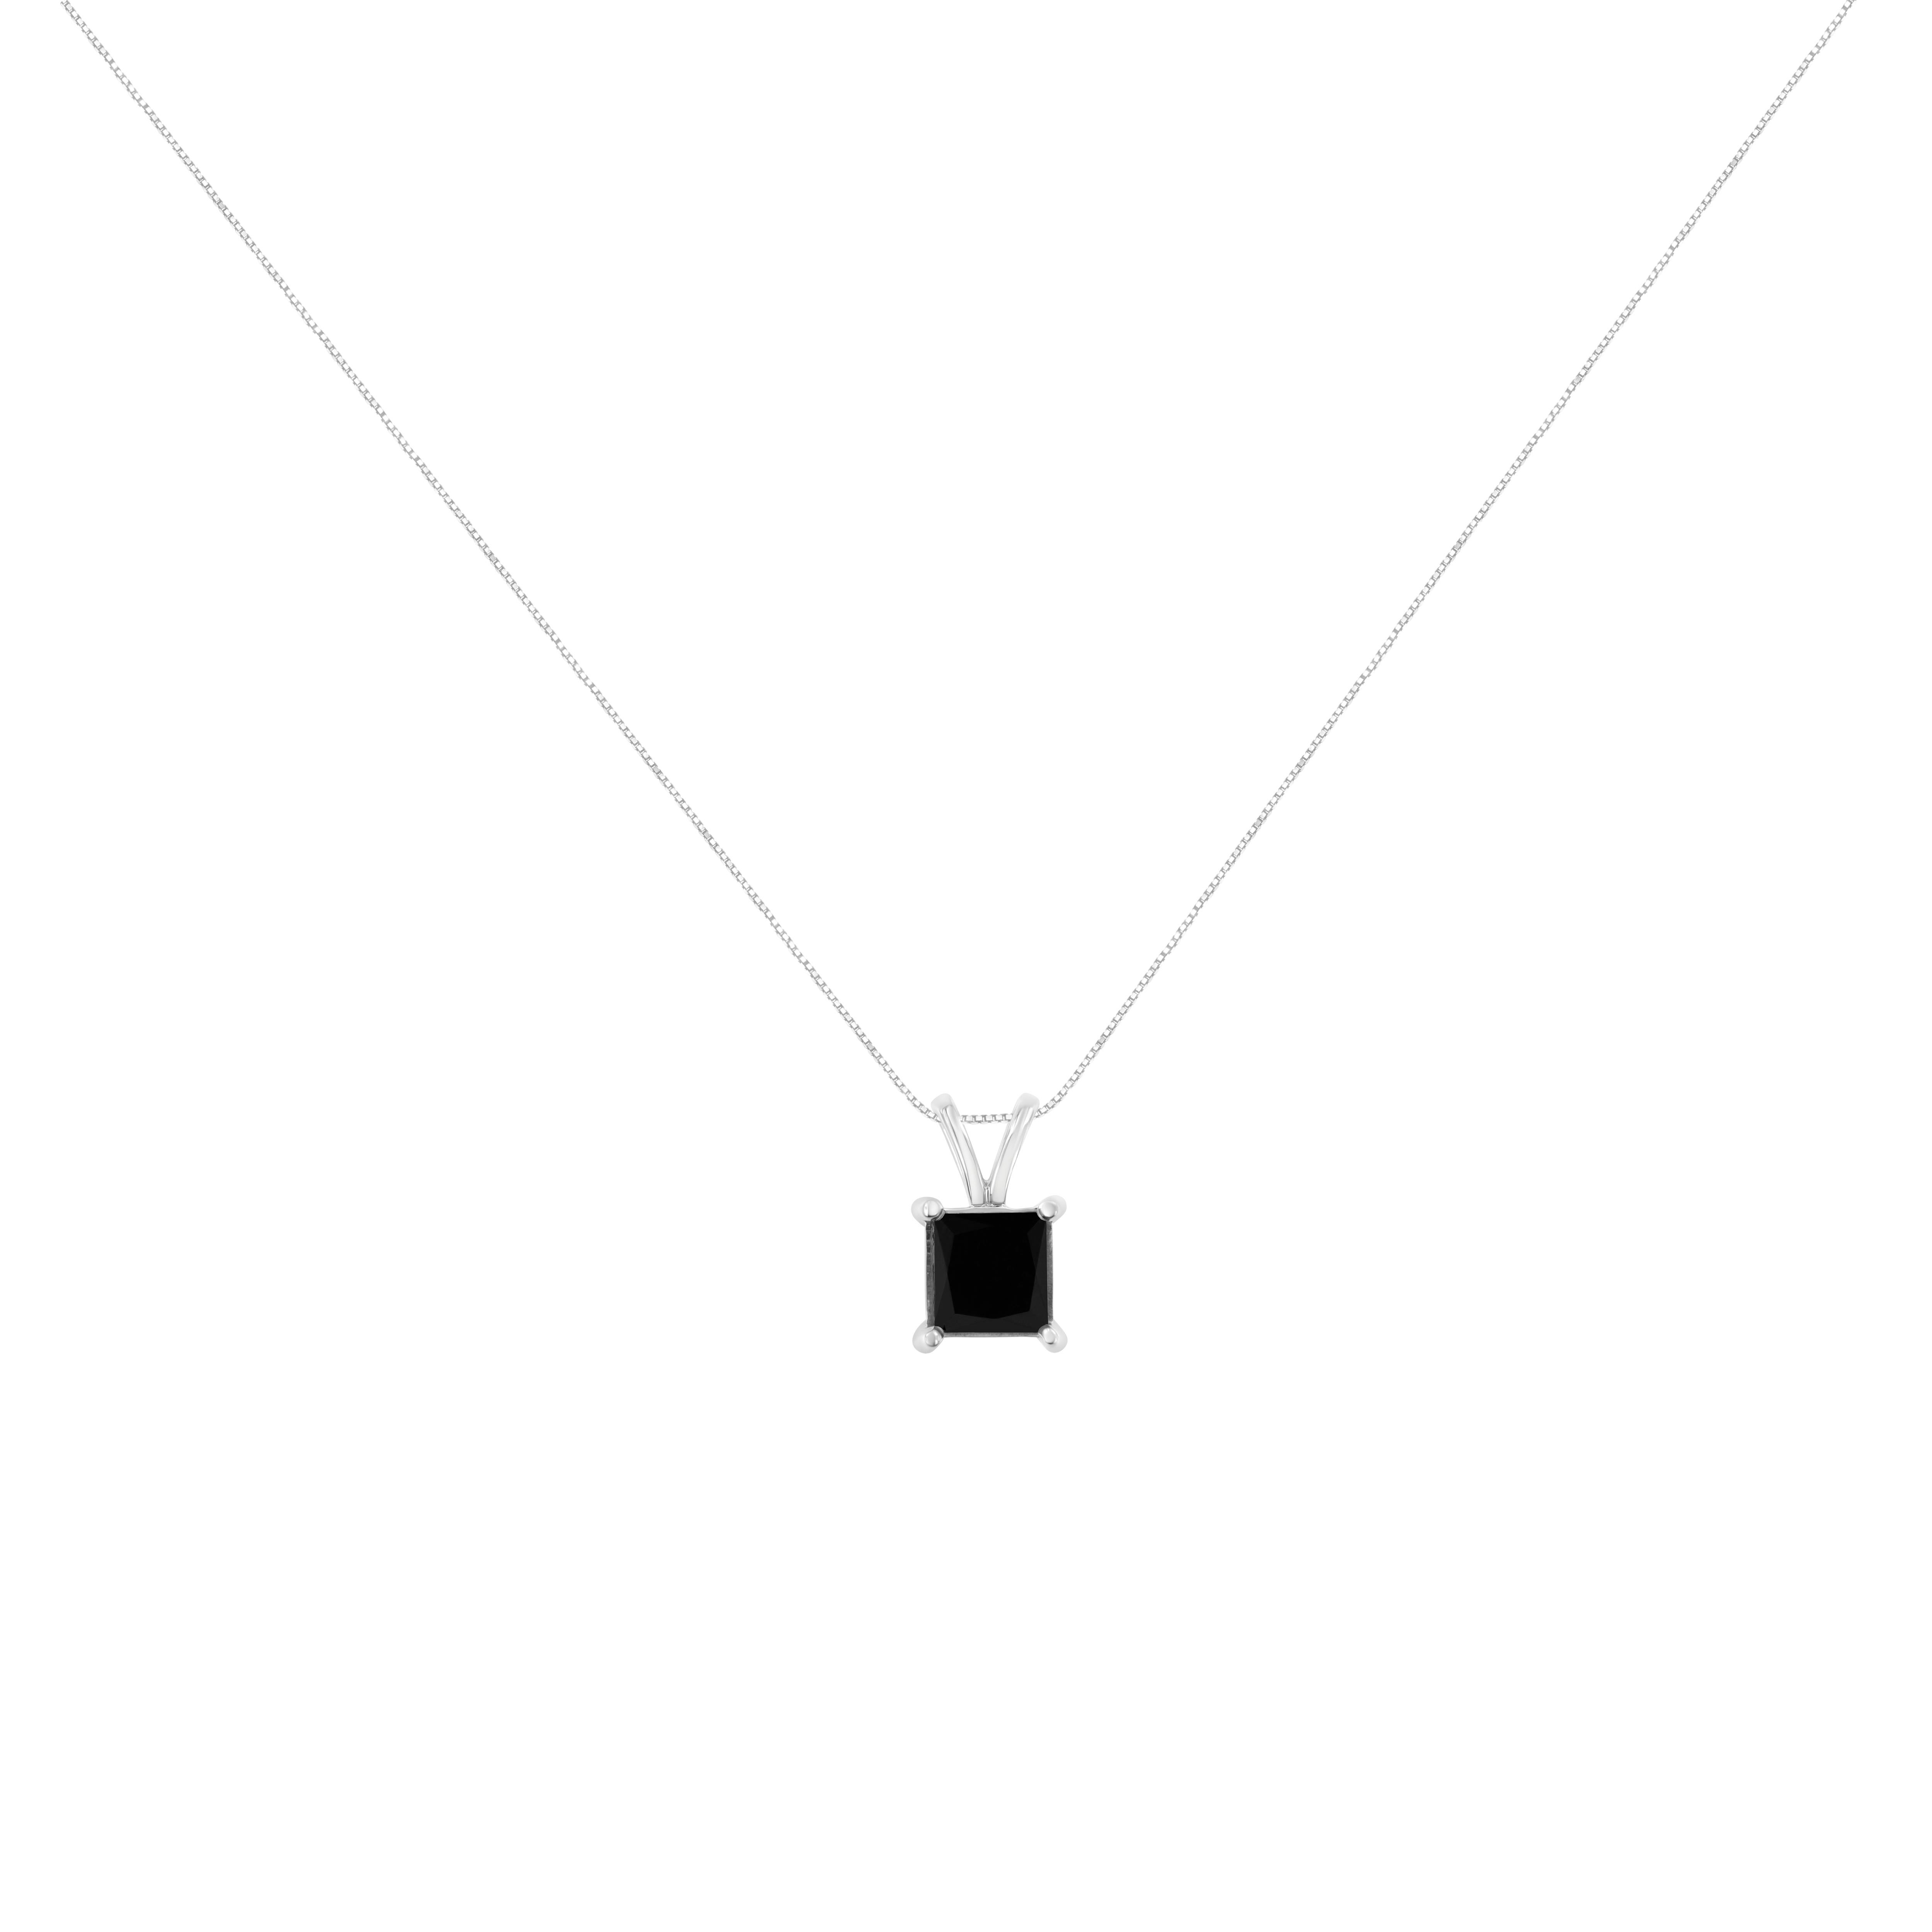 Complement your neckline with this lovely solitaire pendant necklace. A box chain serves as the perfect background for this pendant to dangle from. A stunning, color treated, black princess cut diamond in a prong setting is the centerpiece of this